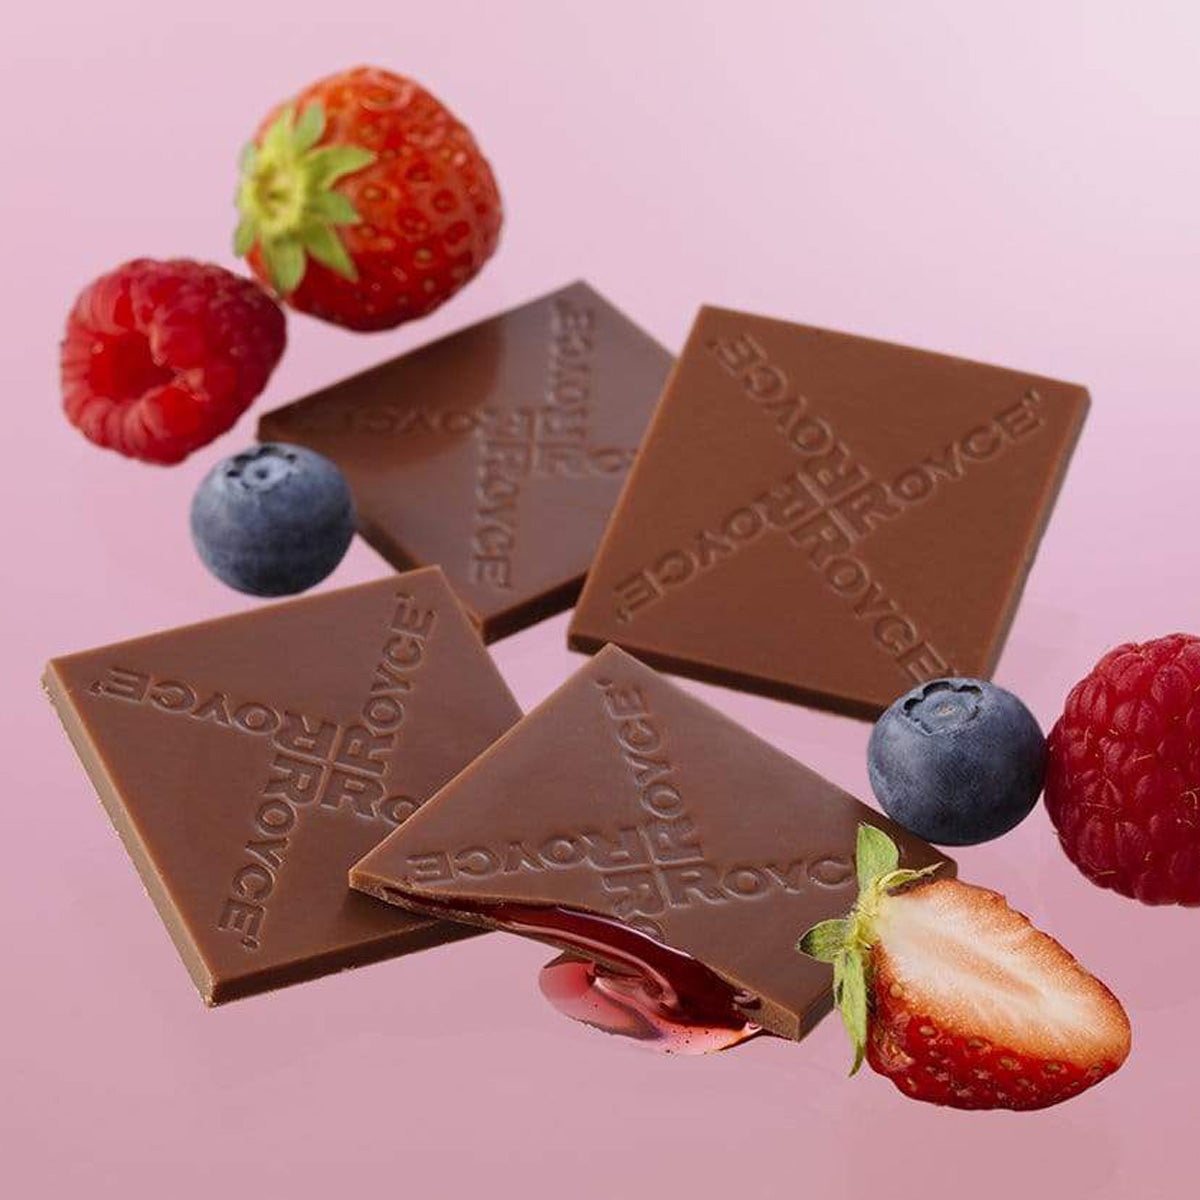 ROYCE' Chocolate - Prafeuille Chocolat "Berry Cube" - Image shows brown chocolate squares with red sauce and engraved with the words "ROYCE'". Accents include red strawberries and raspberries and dark blue blueberries. Background is in pink color. 